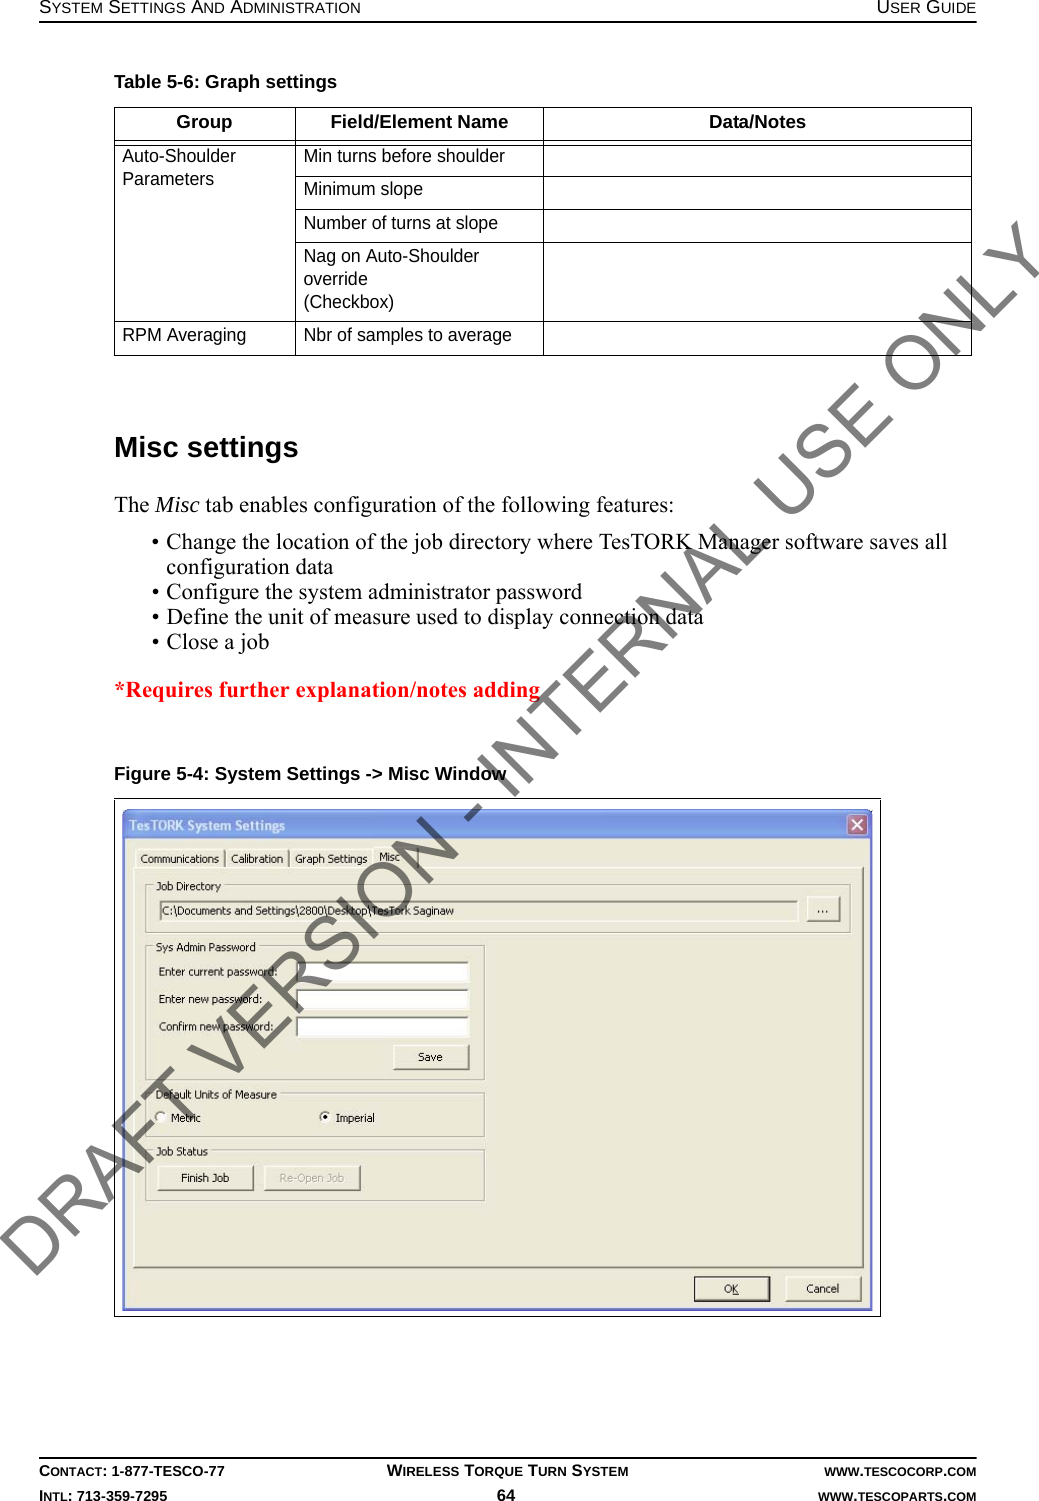 SYSTEM SETTINGS AND ADMINISTRATION USER GUIDECONTACT: 1-877-TESCO-77 WIRELESS TORQUE TURN SYSTEM WWW.TESCOCORP.COMINTL: 713-359-7295 64    WWW.TESCOPARTS.COMMisc settingsThe Misc tab enables configuration of the following features:• Change the location of the job directory where TesTORK Manager software saves all configuration data • Configure the system administrator password• Define the unit of measure used to display connection data• Close a job*Requires further explanation/notes adding Auto-Shoulder Parameters Min turns before shoulderMinimum slopeNumber of turns at slopeNag on Auto-Shoulder override(Checkbox)RPM Averaging Nbr of samples to averageFigure 5-4: System Settings -&gt; Misc WindowTable 5-6: Graph settingsGroup Field/Element Name Data/NotesDRAFT VERSION - INTERNAL USE ONLY